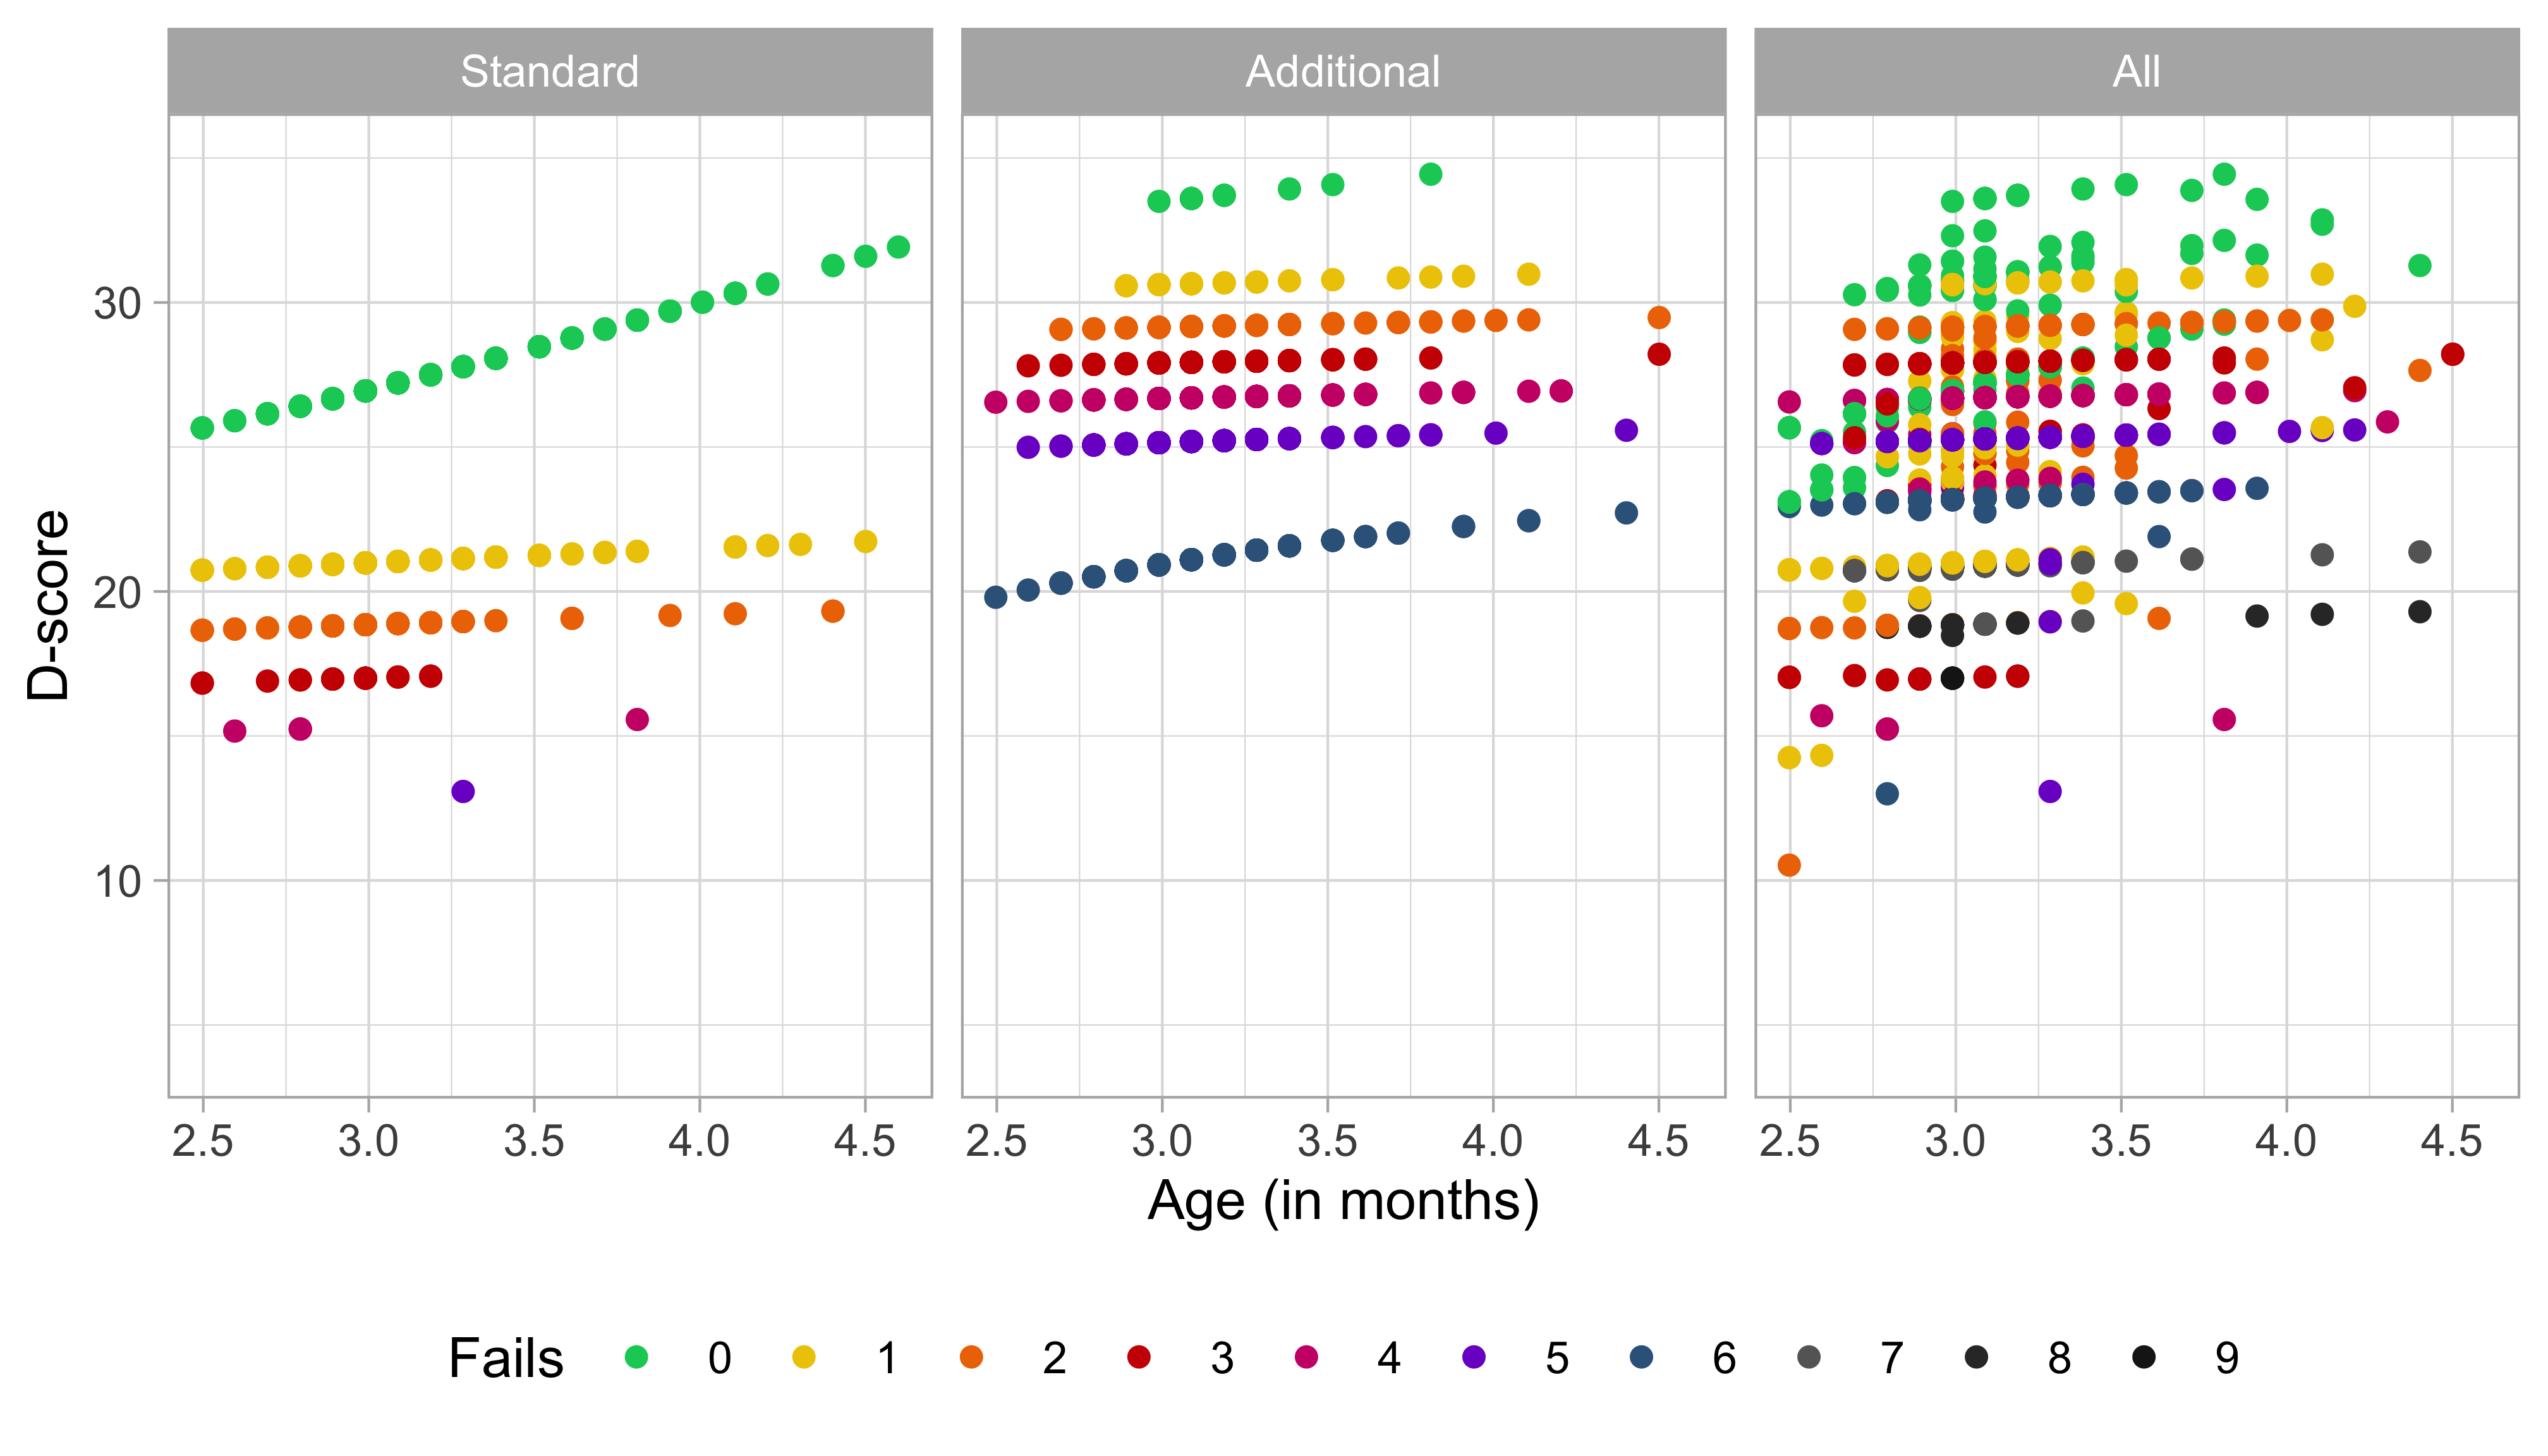 Distribution of the D-scores calculated from the standard, additional and all available milestones at month 3. Colors correspond to the number of fails.